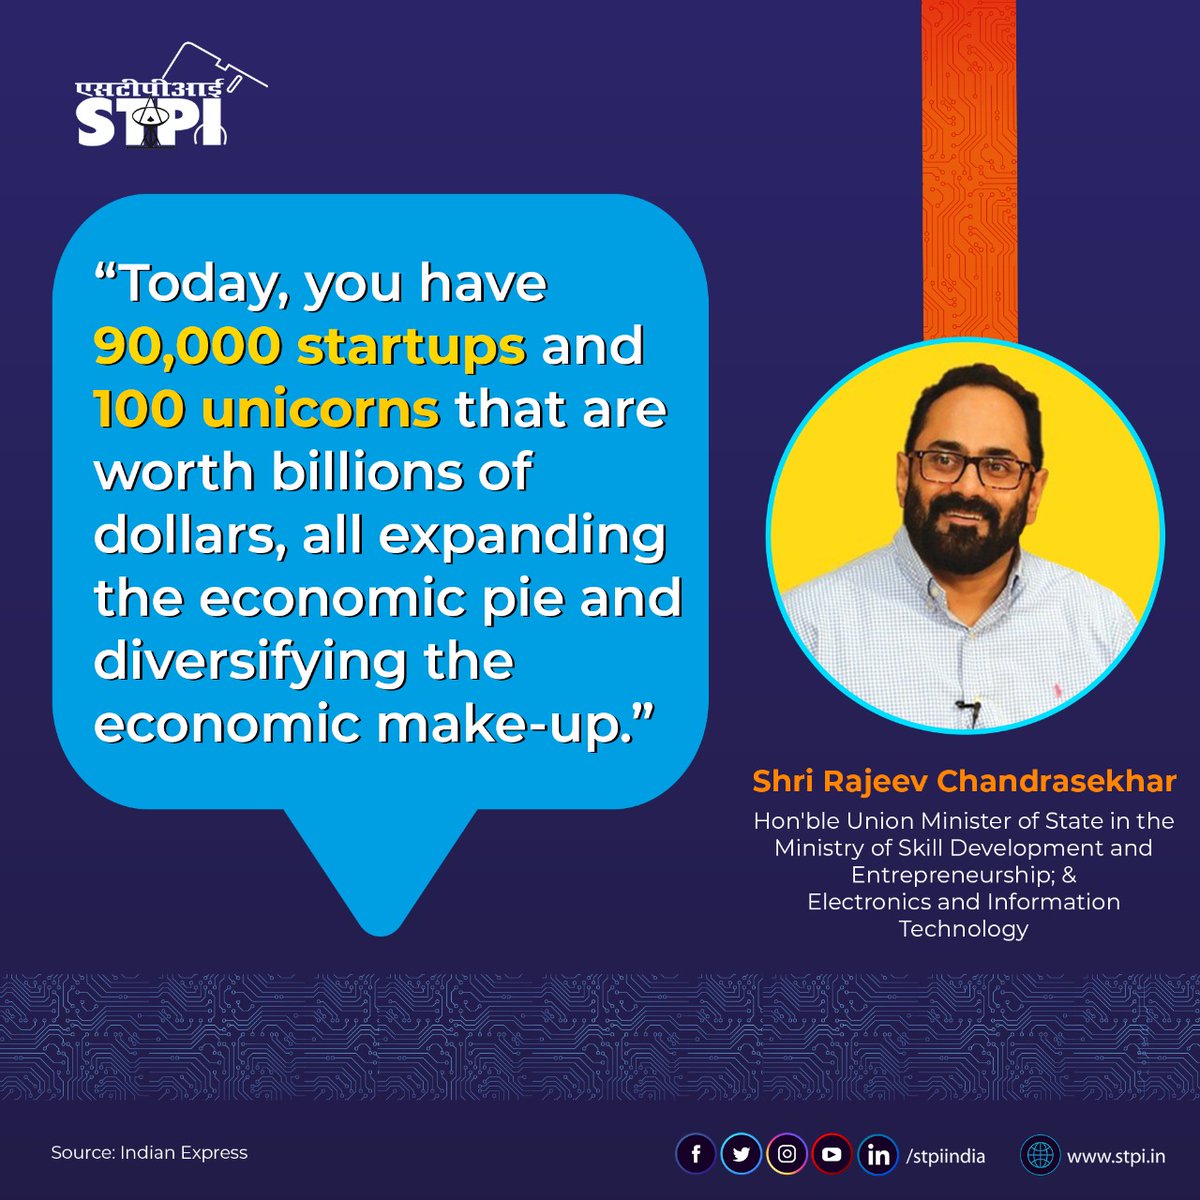 Hon. MoS @GoI_MeitY Sh. @Rajeev_GoI while interacting with journalists of @IndianExpress at #IdeaExchange cites how startups & unicorns are expanding the economic pie of India, bolstering the digital economy, and realizing Hon. PM Sh. @NarendraModi’s vision on #IndiasTechade.